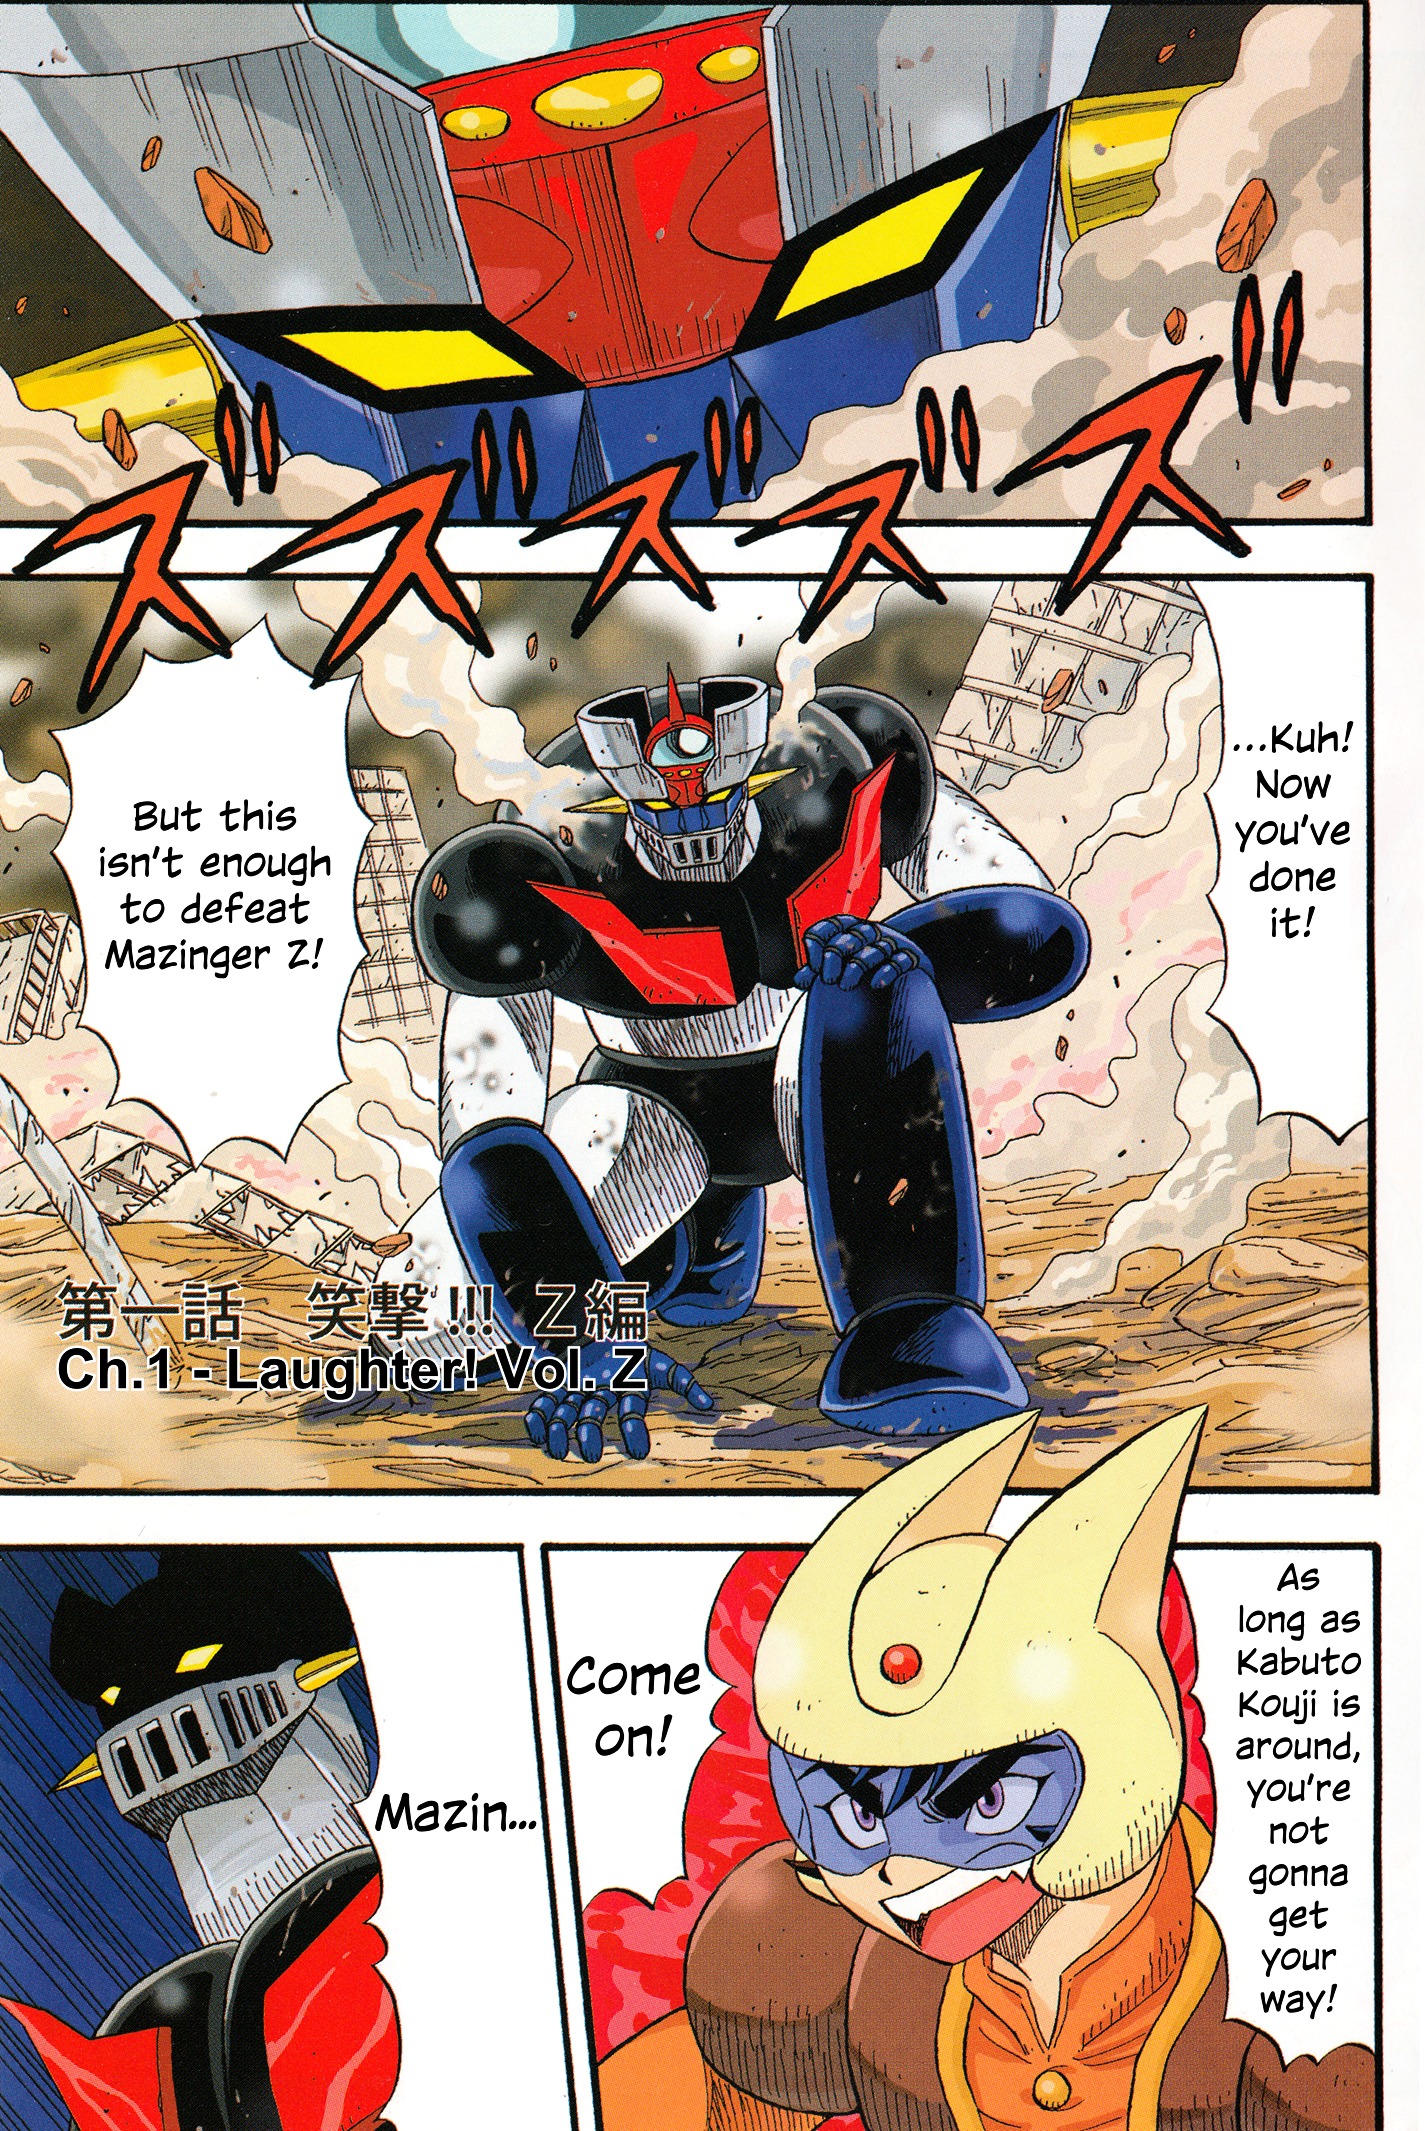 Mazinger Otome Vol.1 Chapter 1 : Laughter! Vol. Z - Picture 3